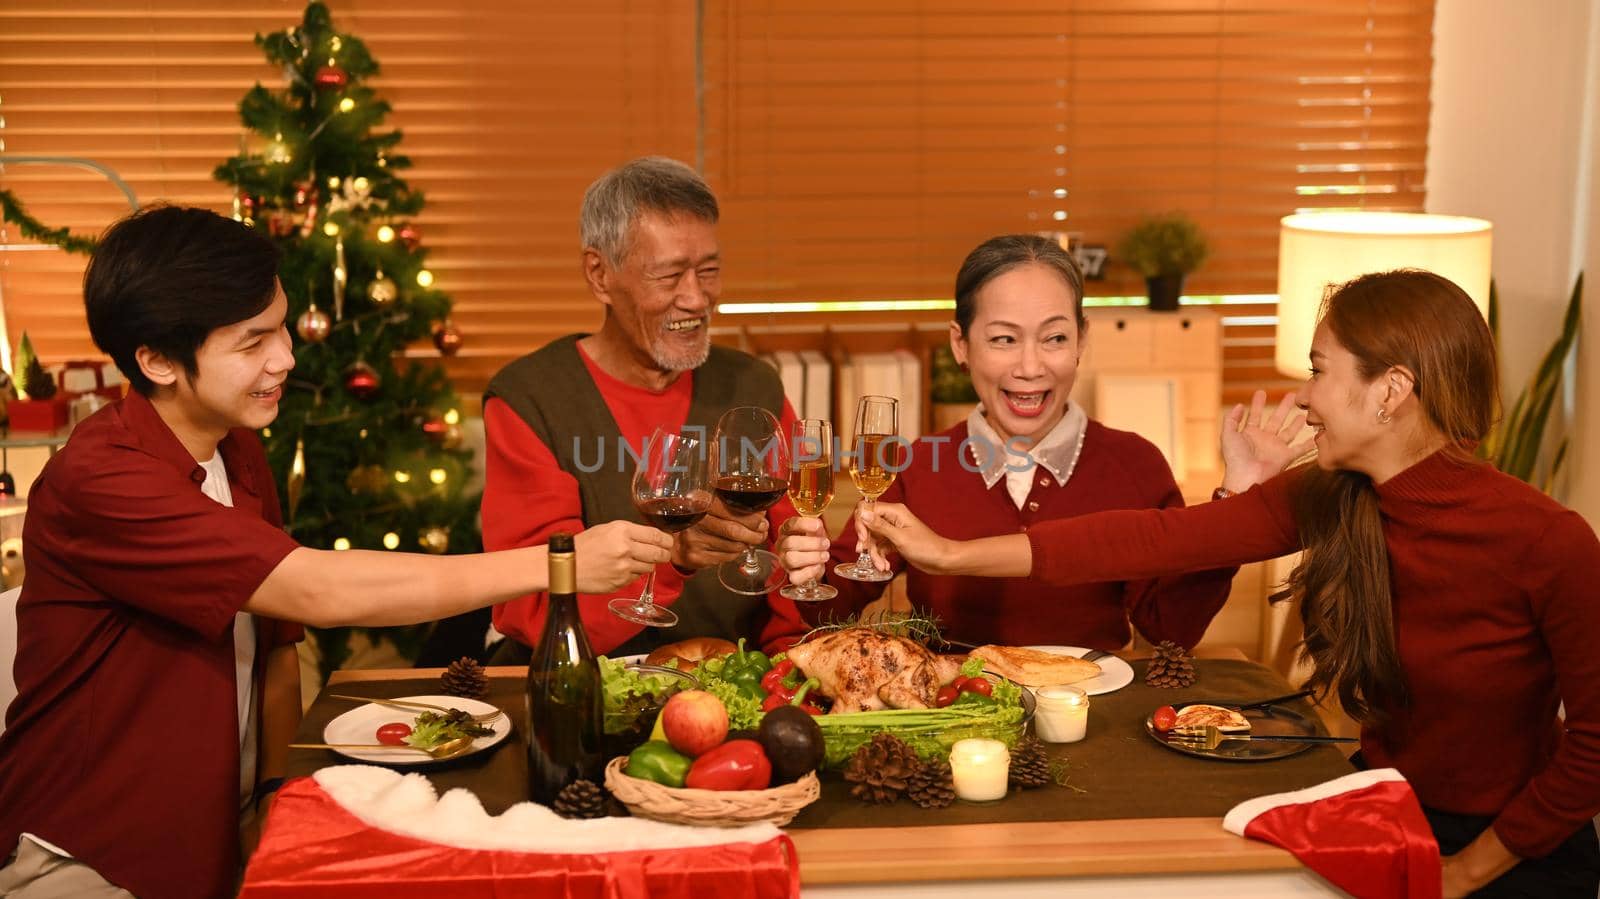 Happy family are clinking glass of wine during celebrating Christmas party dinner. Christmas and thanksgiving concept.